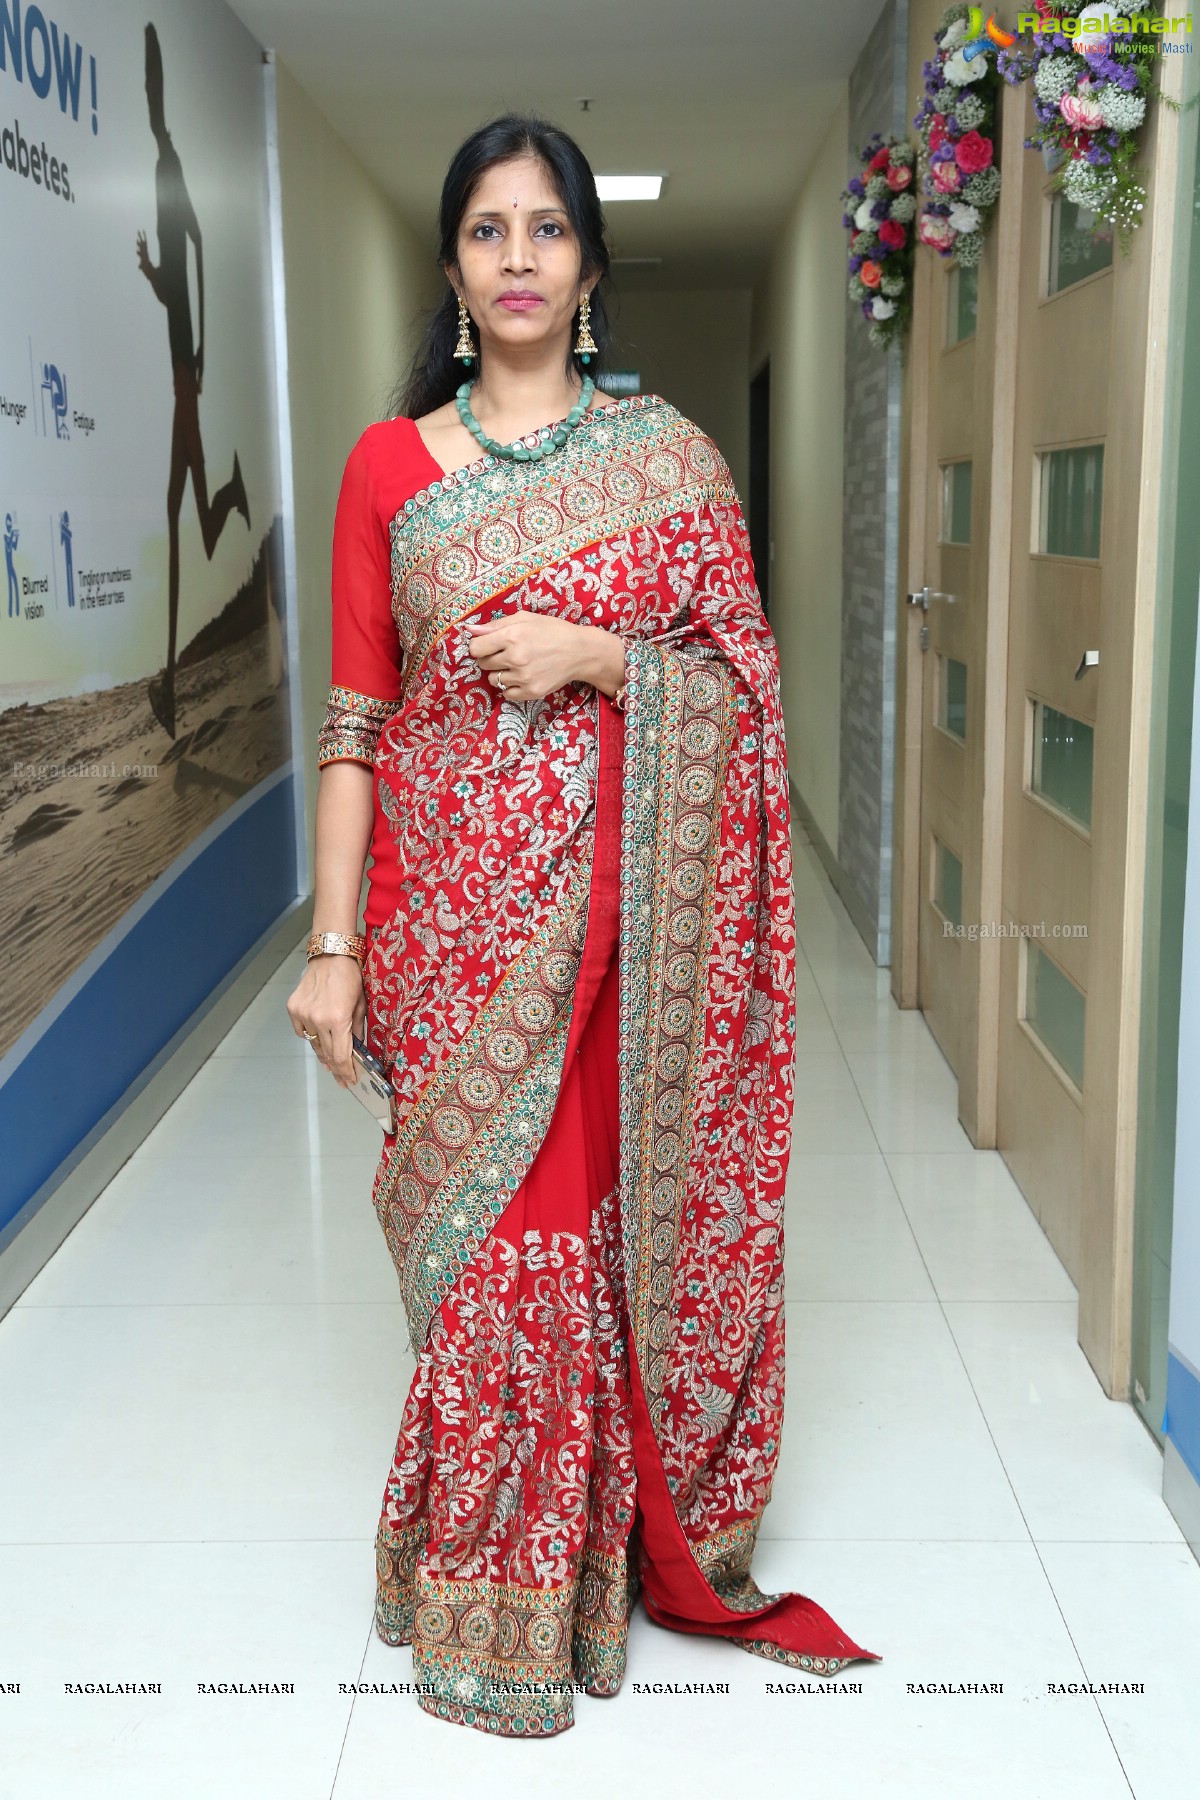 KIMS-LIVLIFE Centre Inaugurated By Padma Shri PV Sindhu (Indian Badminton Player)